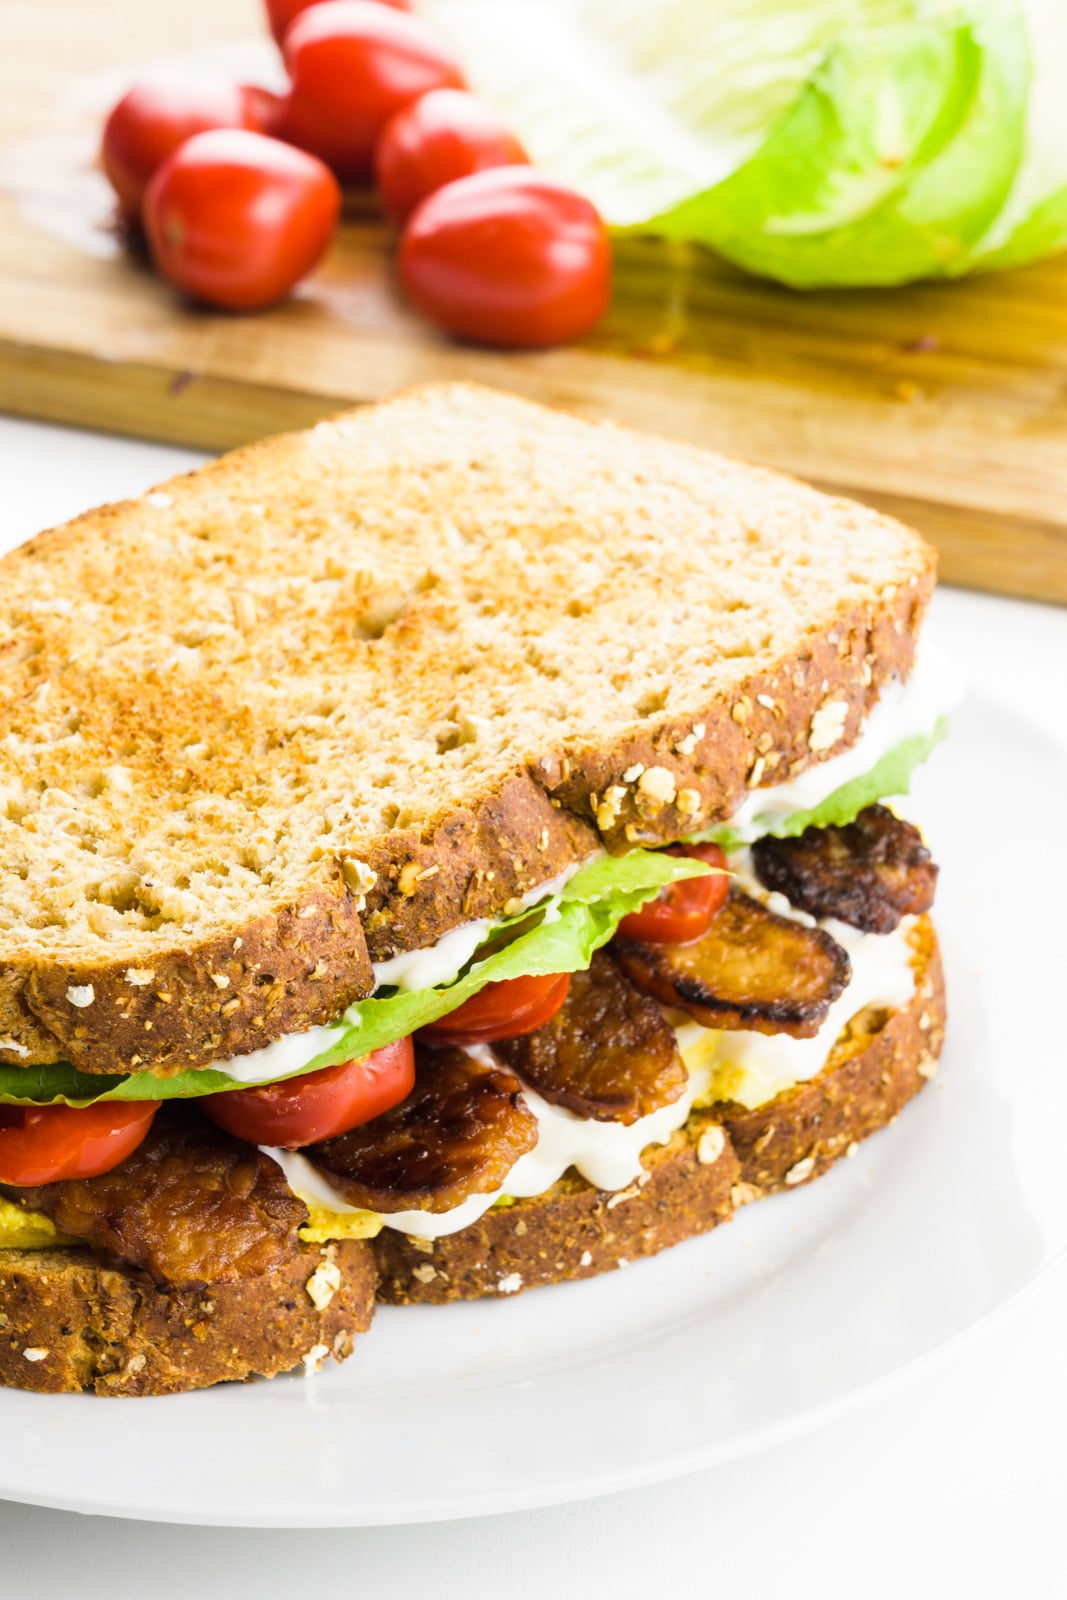 A toasted sandwich sits on a plate. It has chopped tomatoes, lettuce, and mayo in it. Behind it is a cutting board with cherry tomatoes and lettuce.